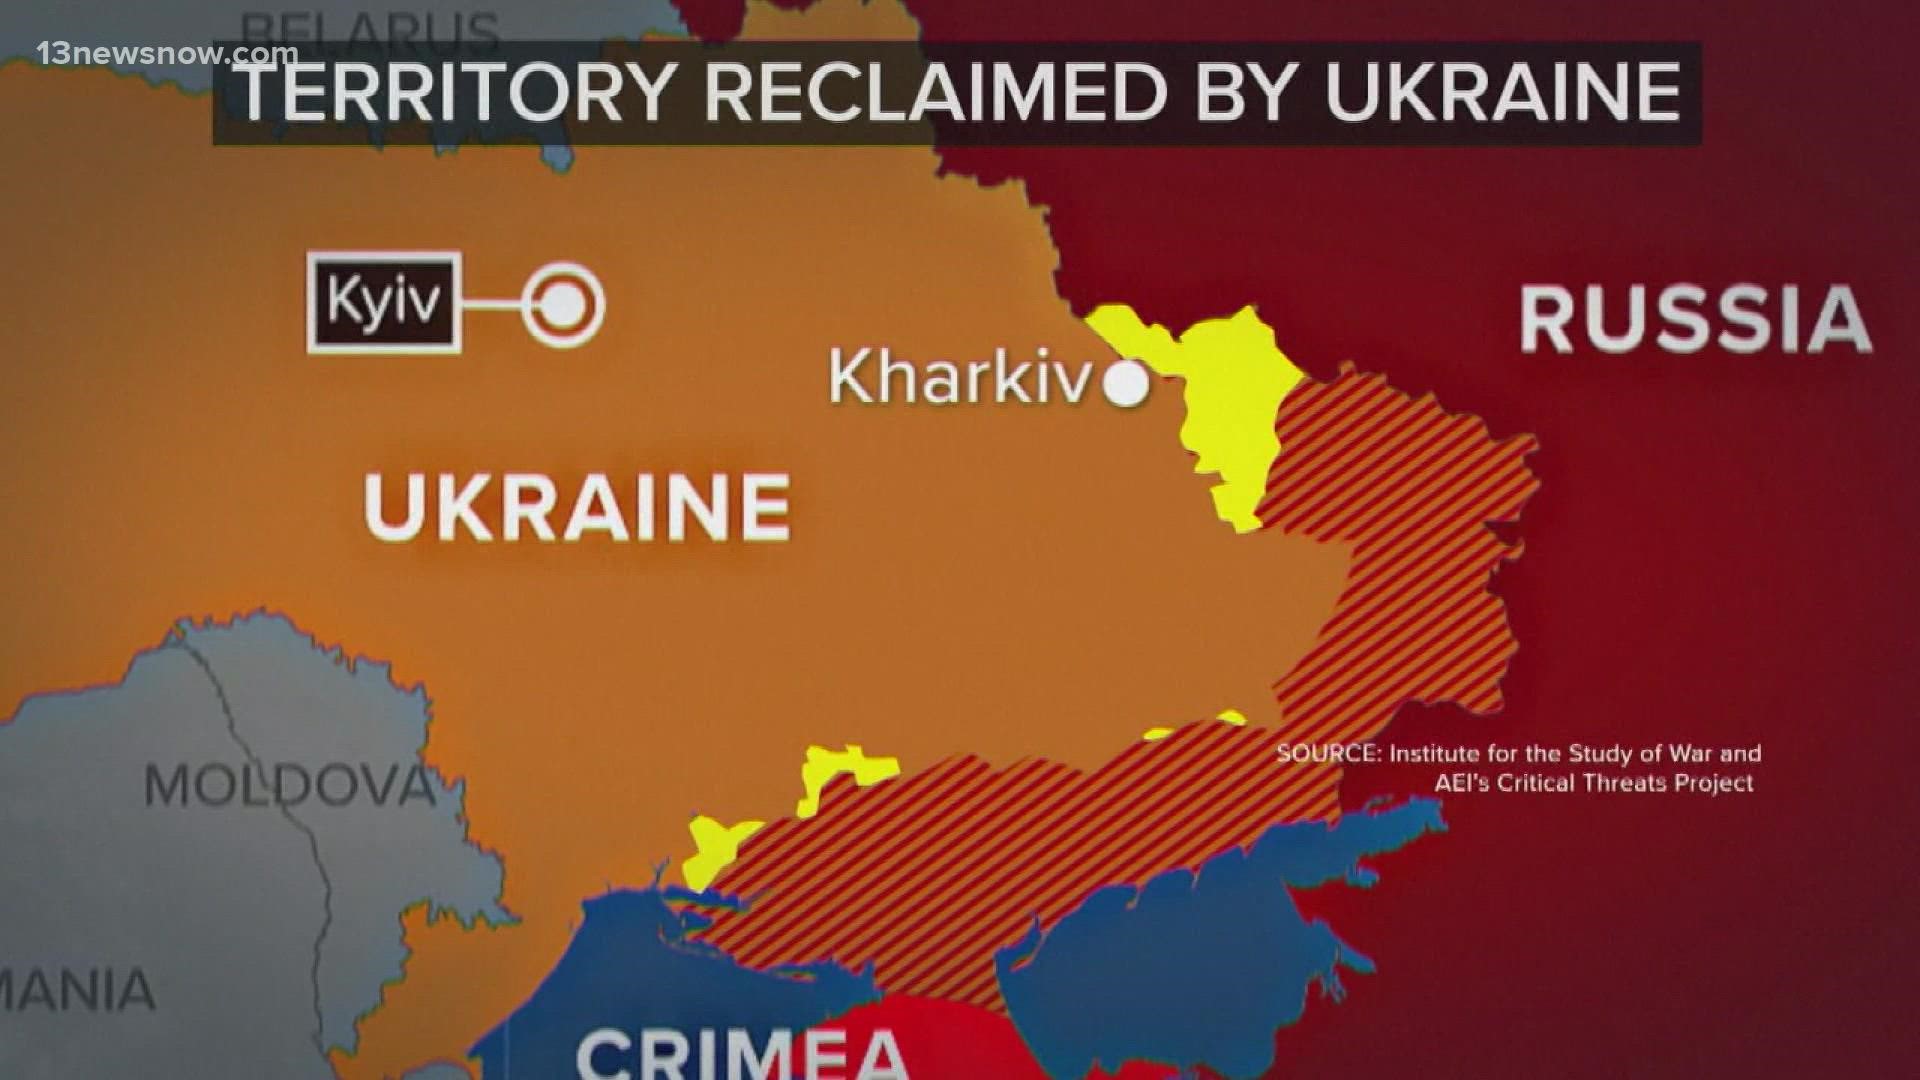 The Ukrainian counter-offensive is yielding victories. Their forces are retaking large amounts of territory.